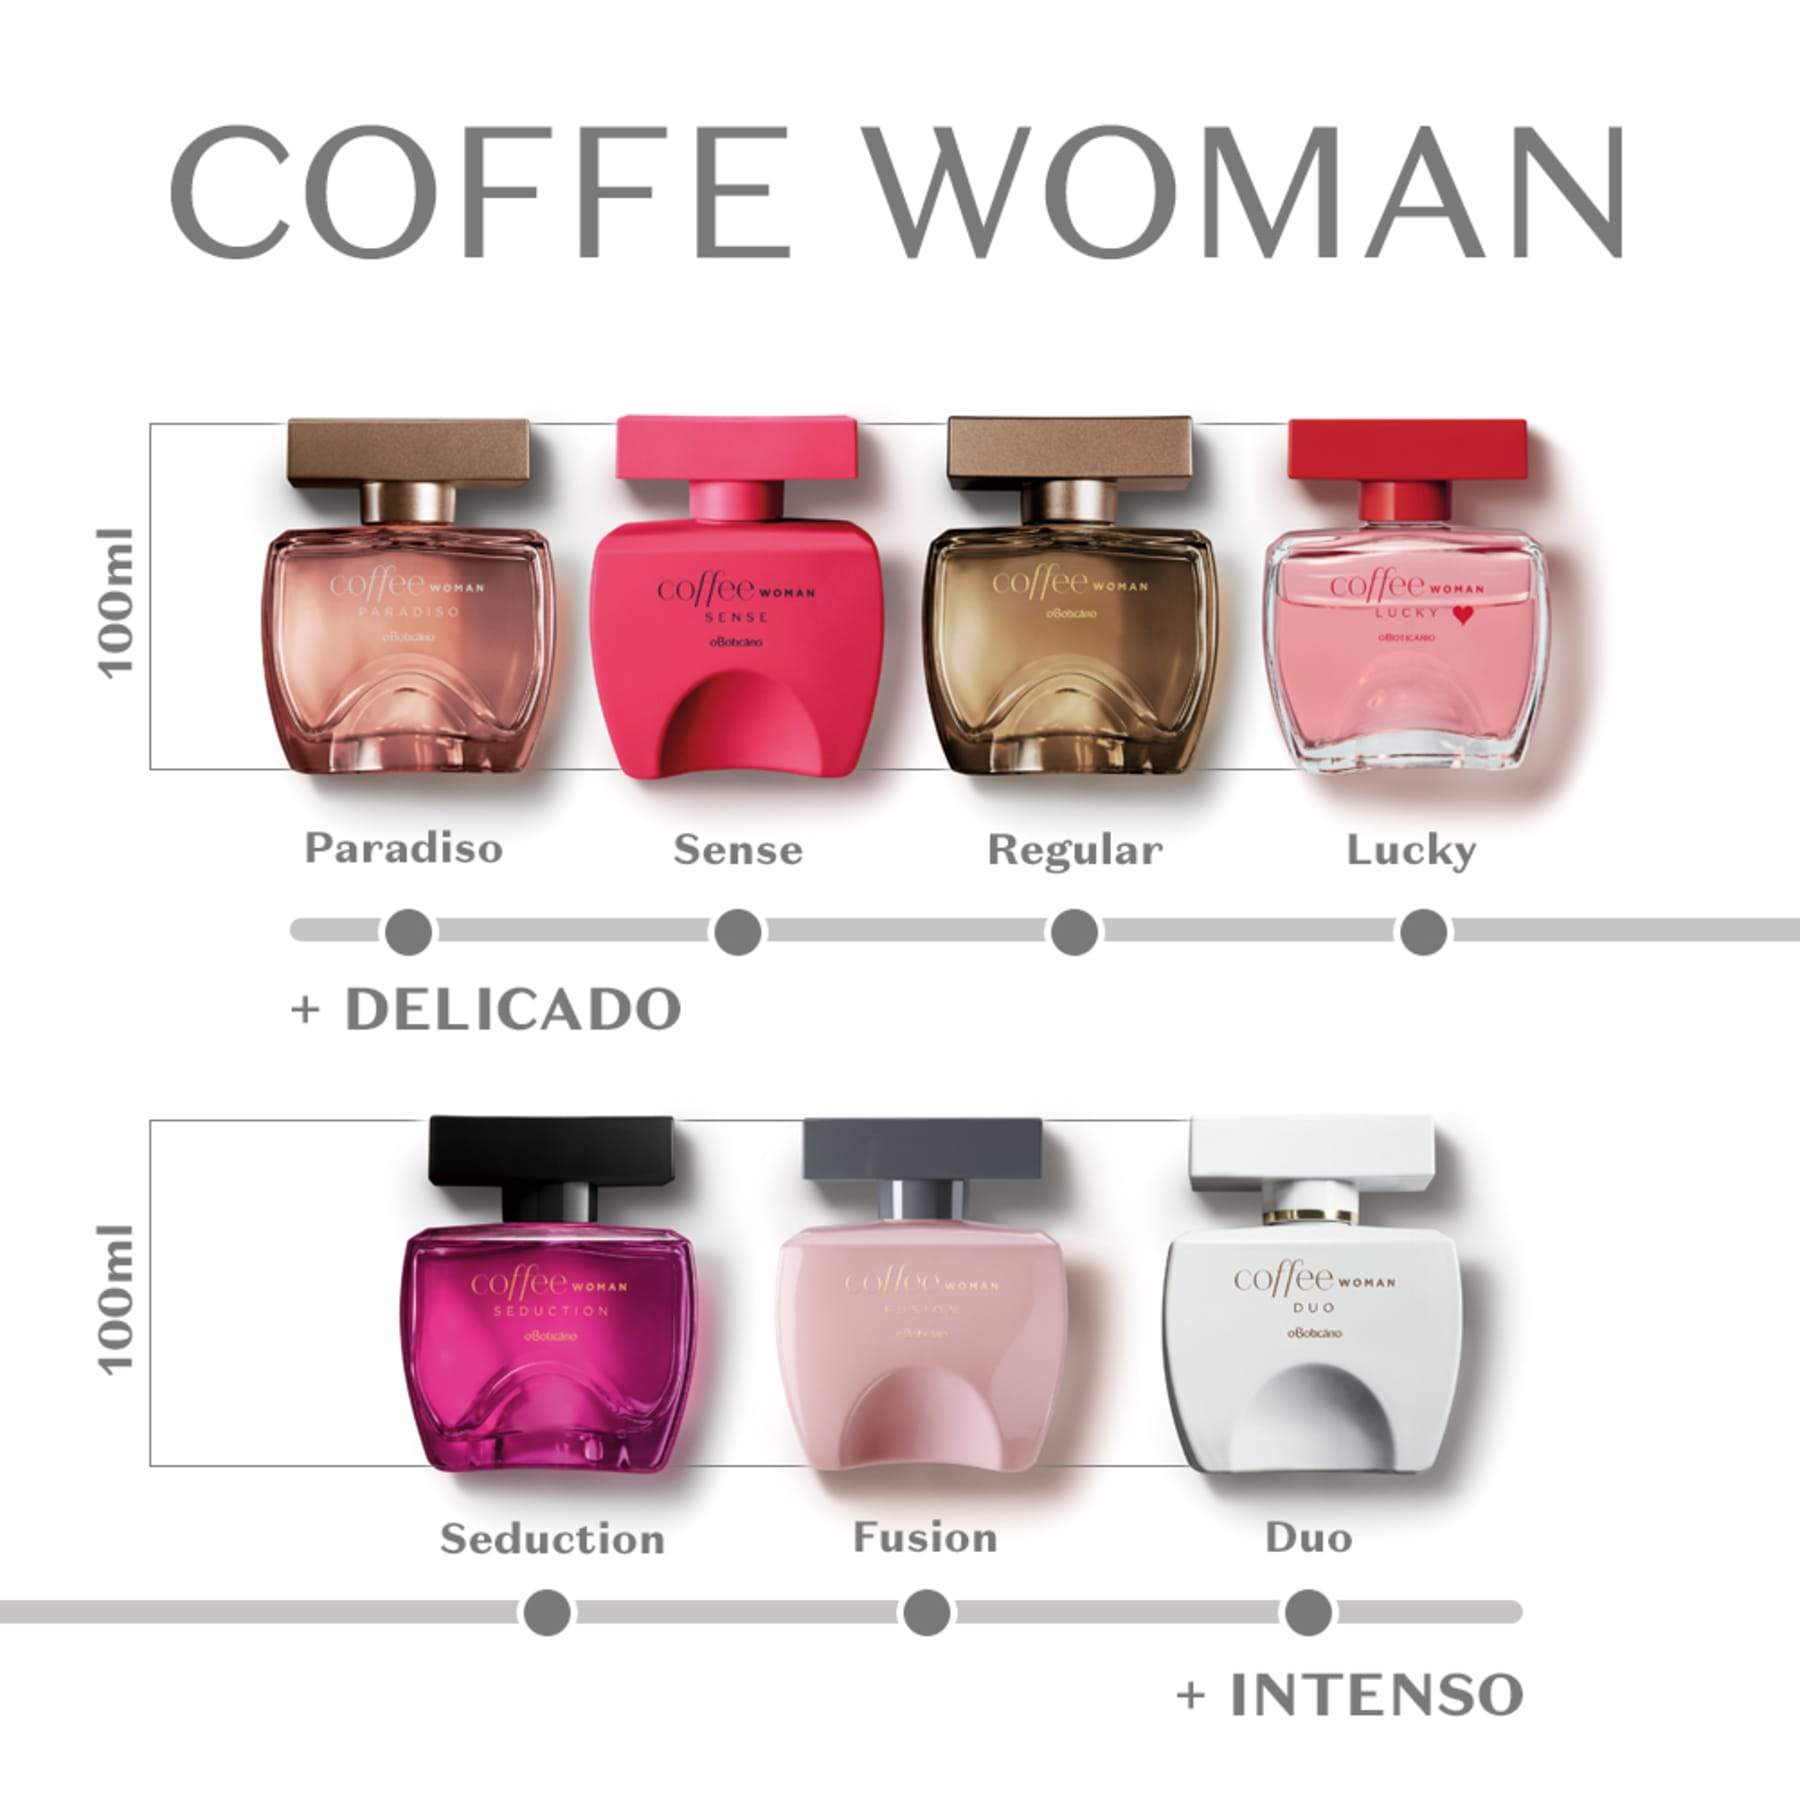 https://cdn.shopify.com/s/files/1/0731/5170/9479/products/af_layout_1000x1000_coffee_woman.jpg?v=1688489865&width=1800